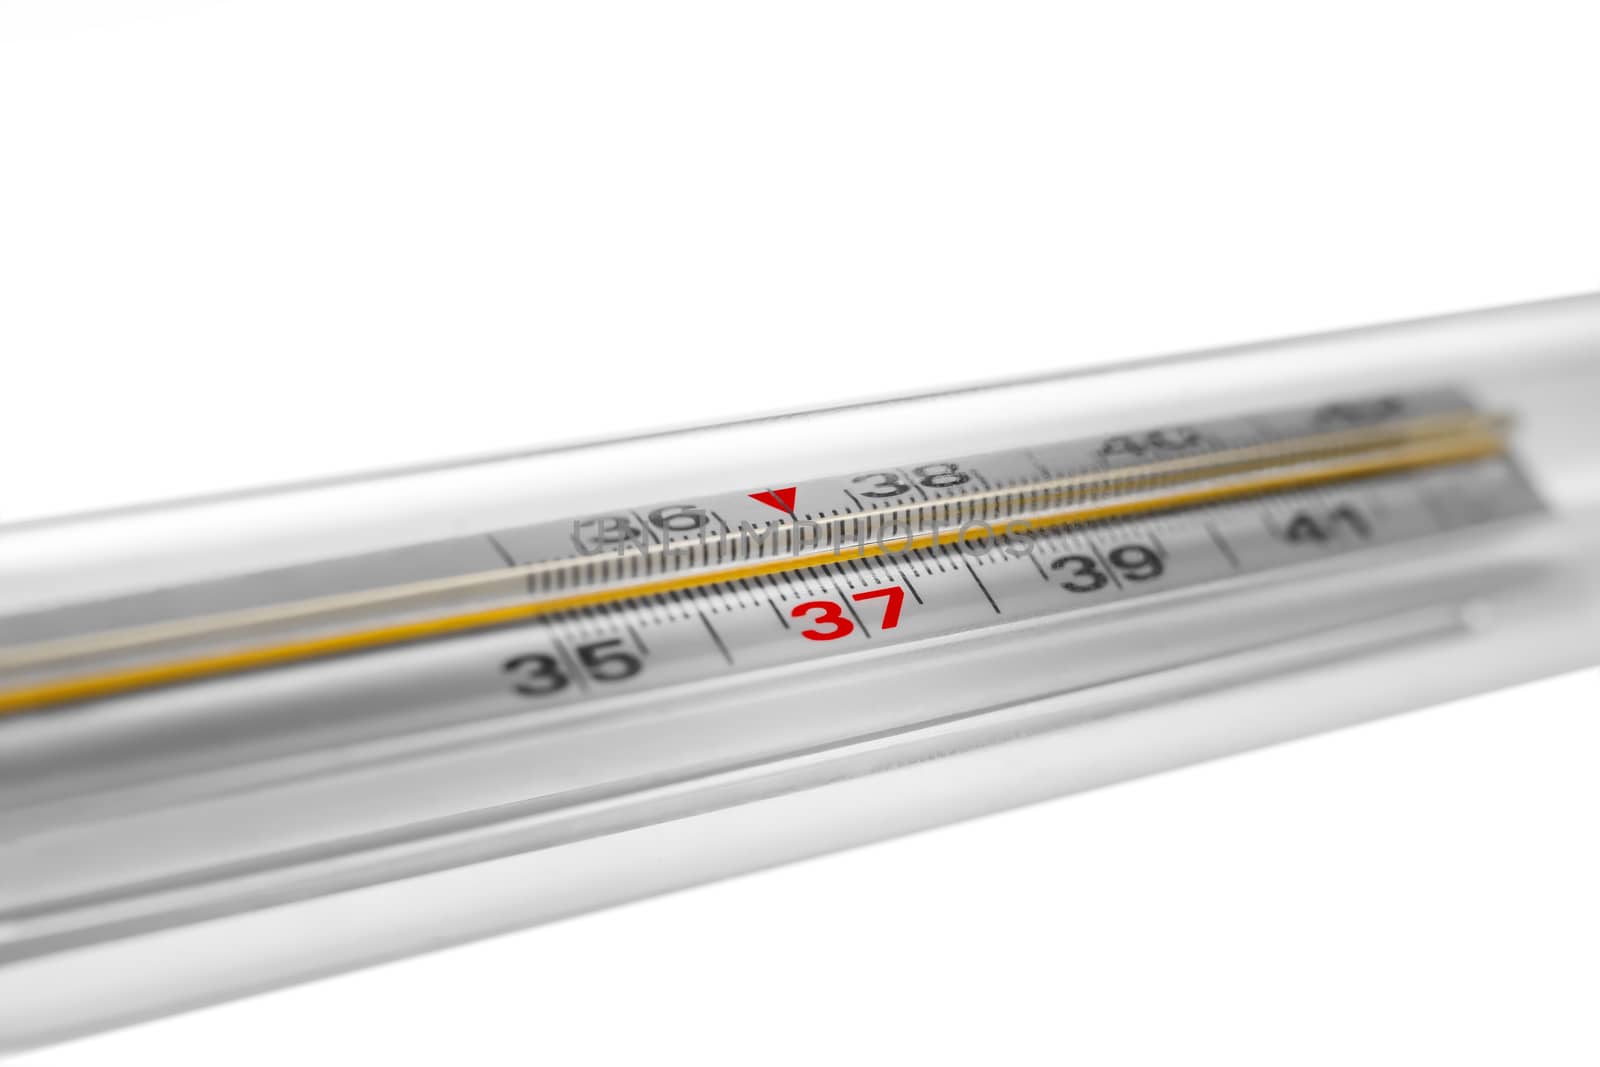 Mercury thermometer. Close-up numbers and symbols